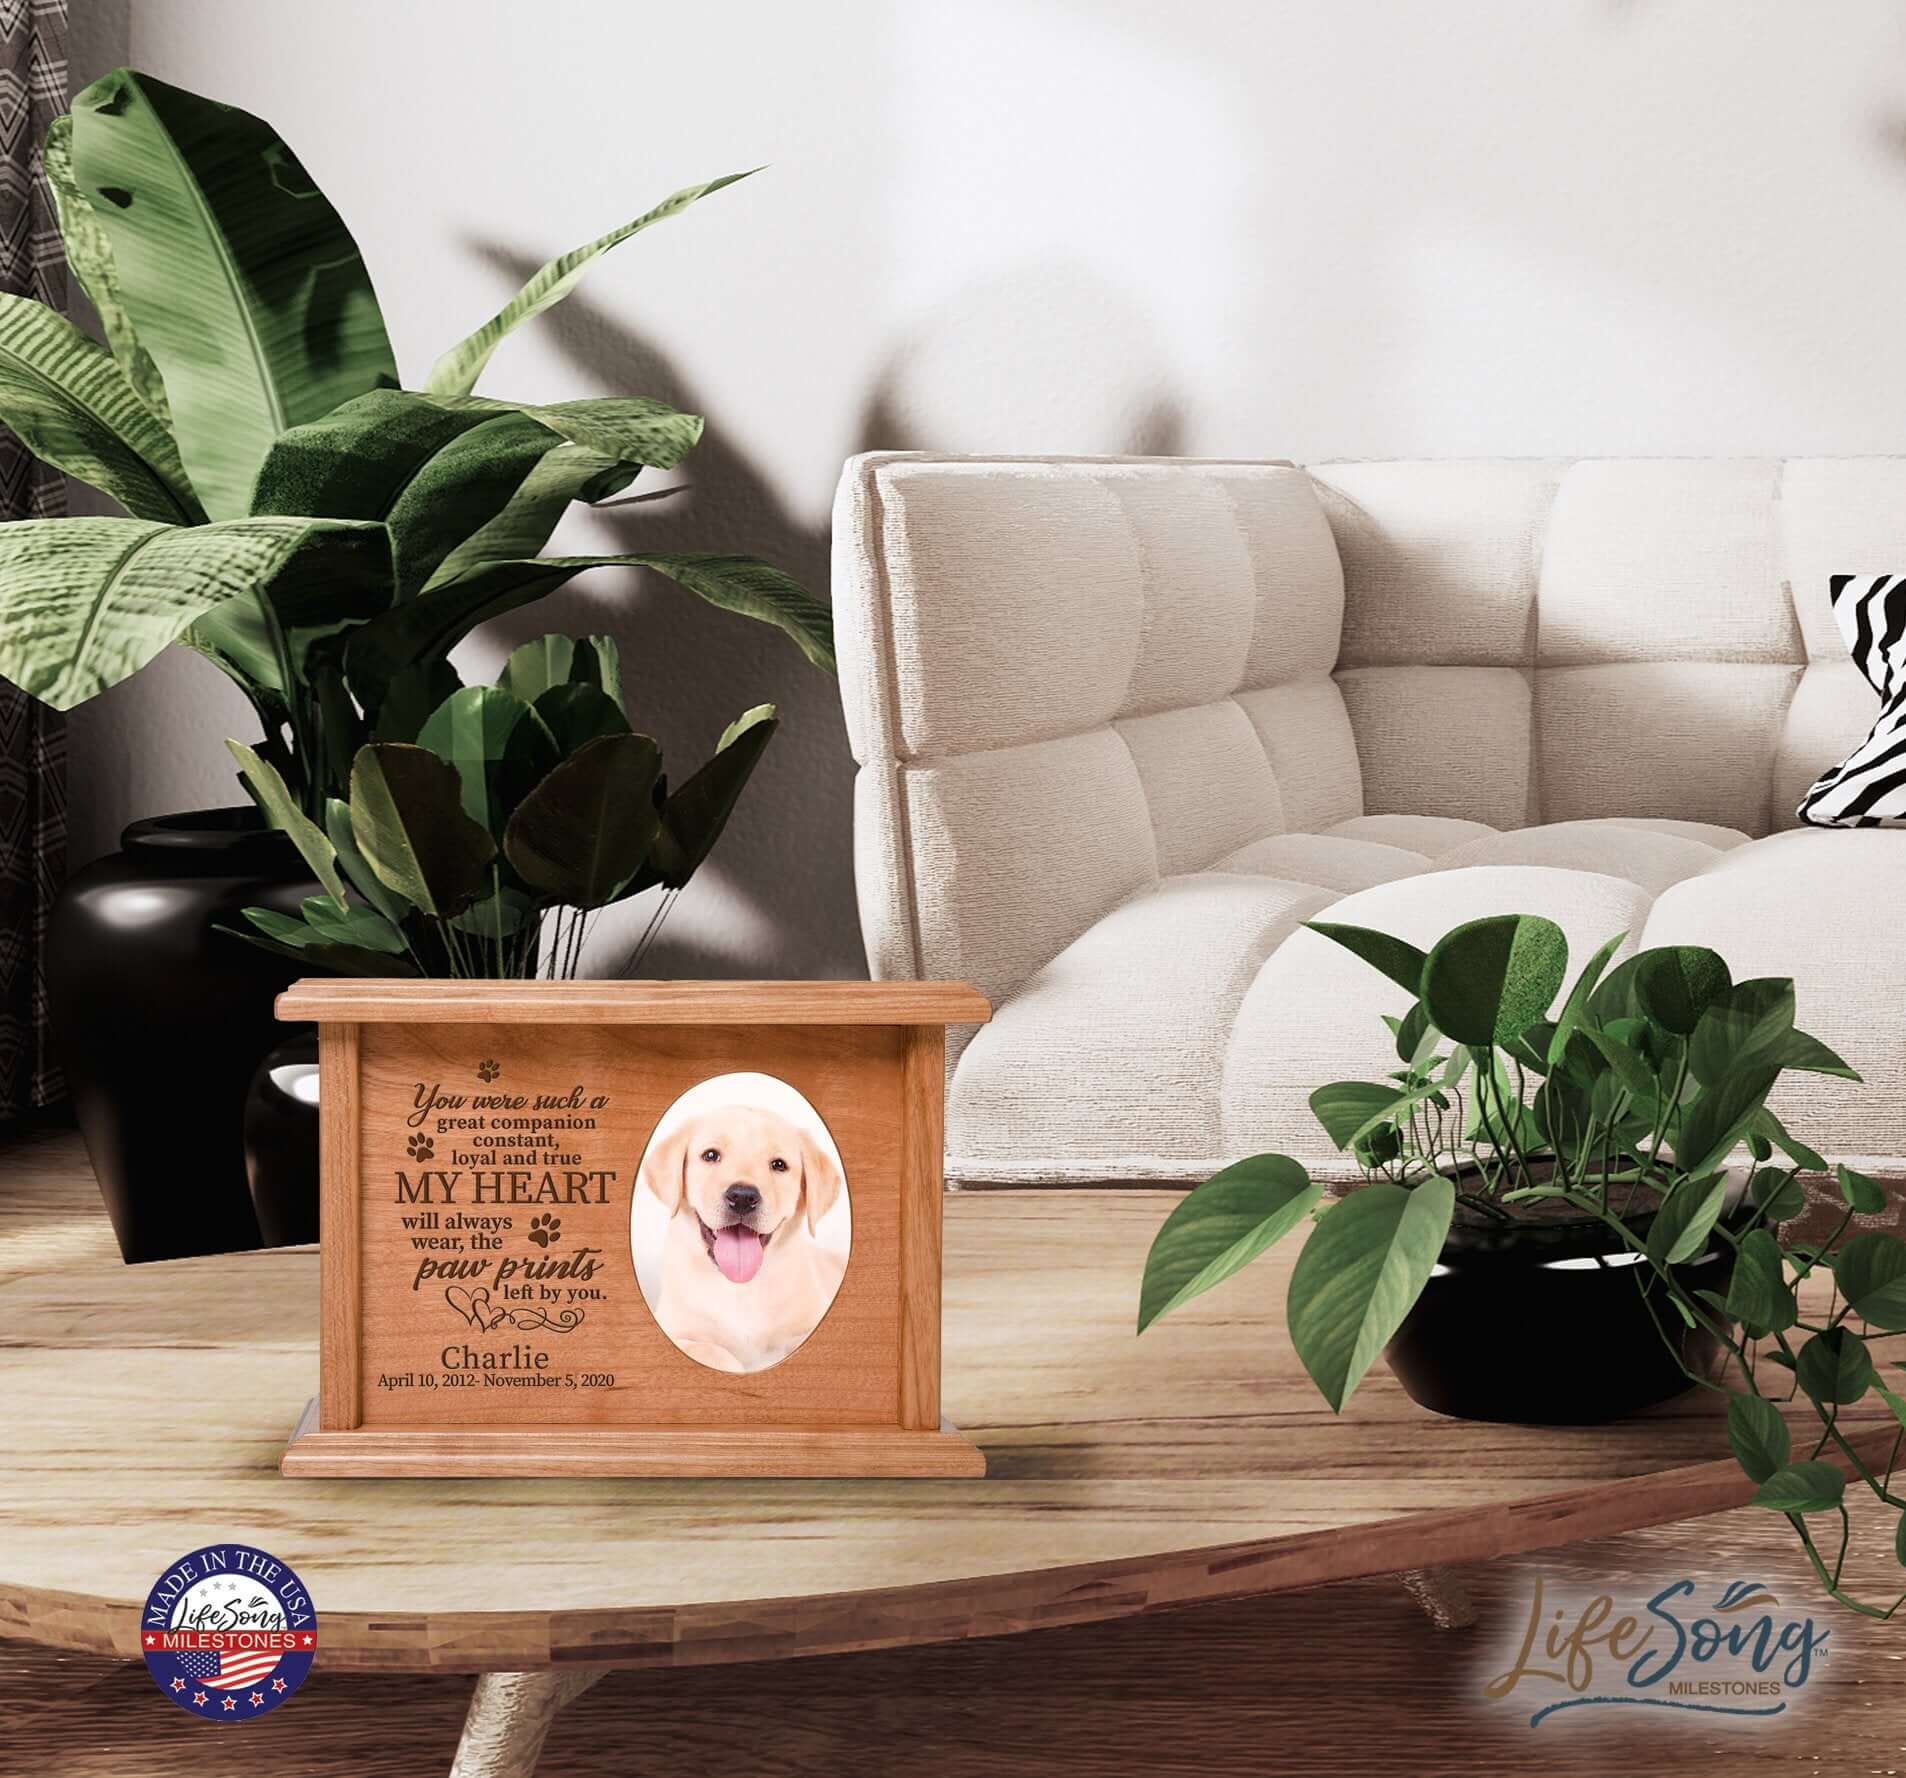 Pet Memorial Picture Cremation Urn Box for Dog or Cat - You Were Such A Great Companion